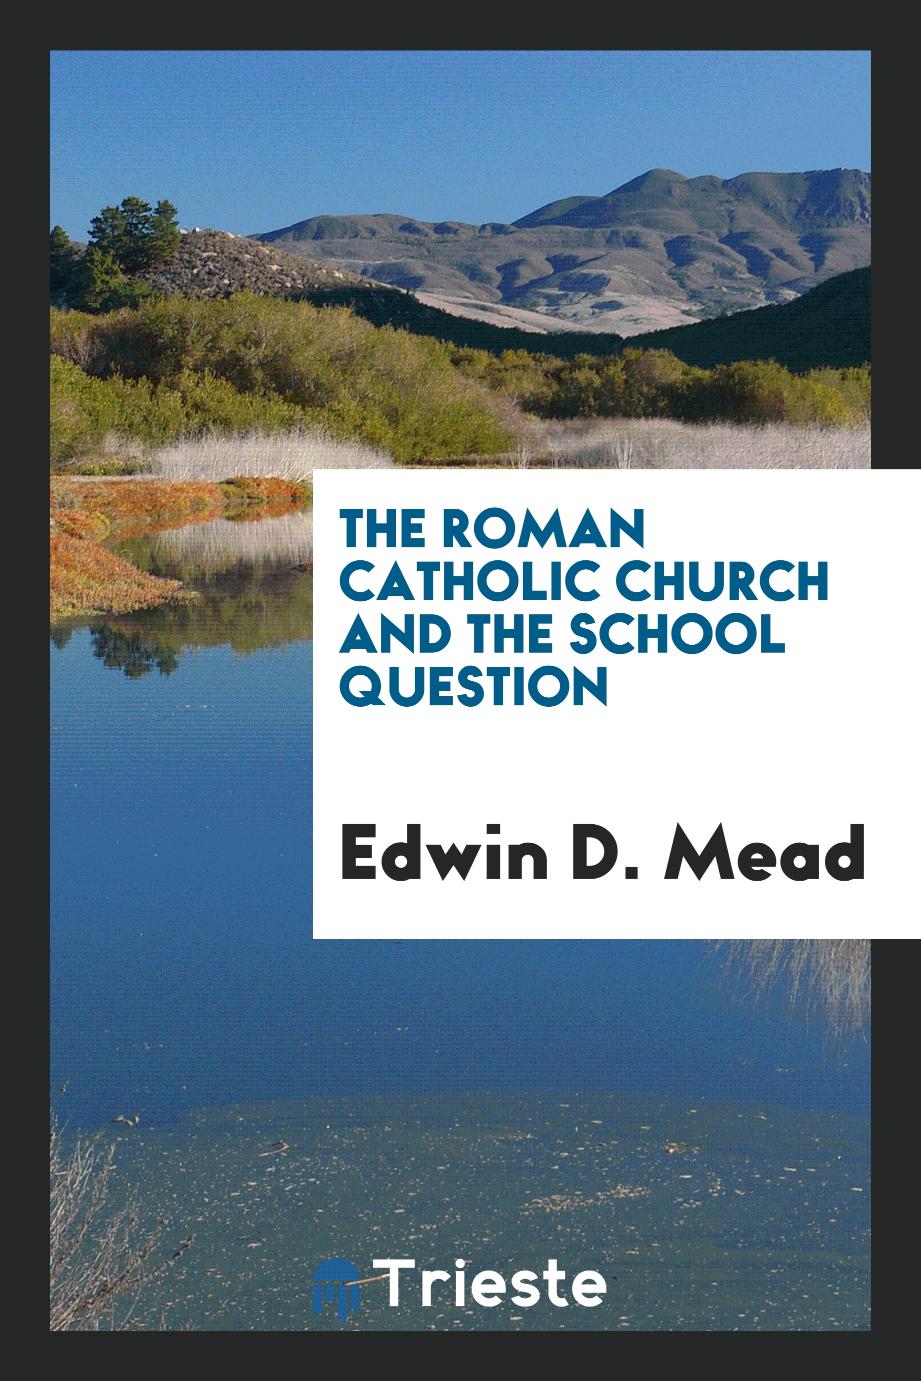 The Roman Catholic Church and the School Question